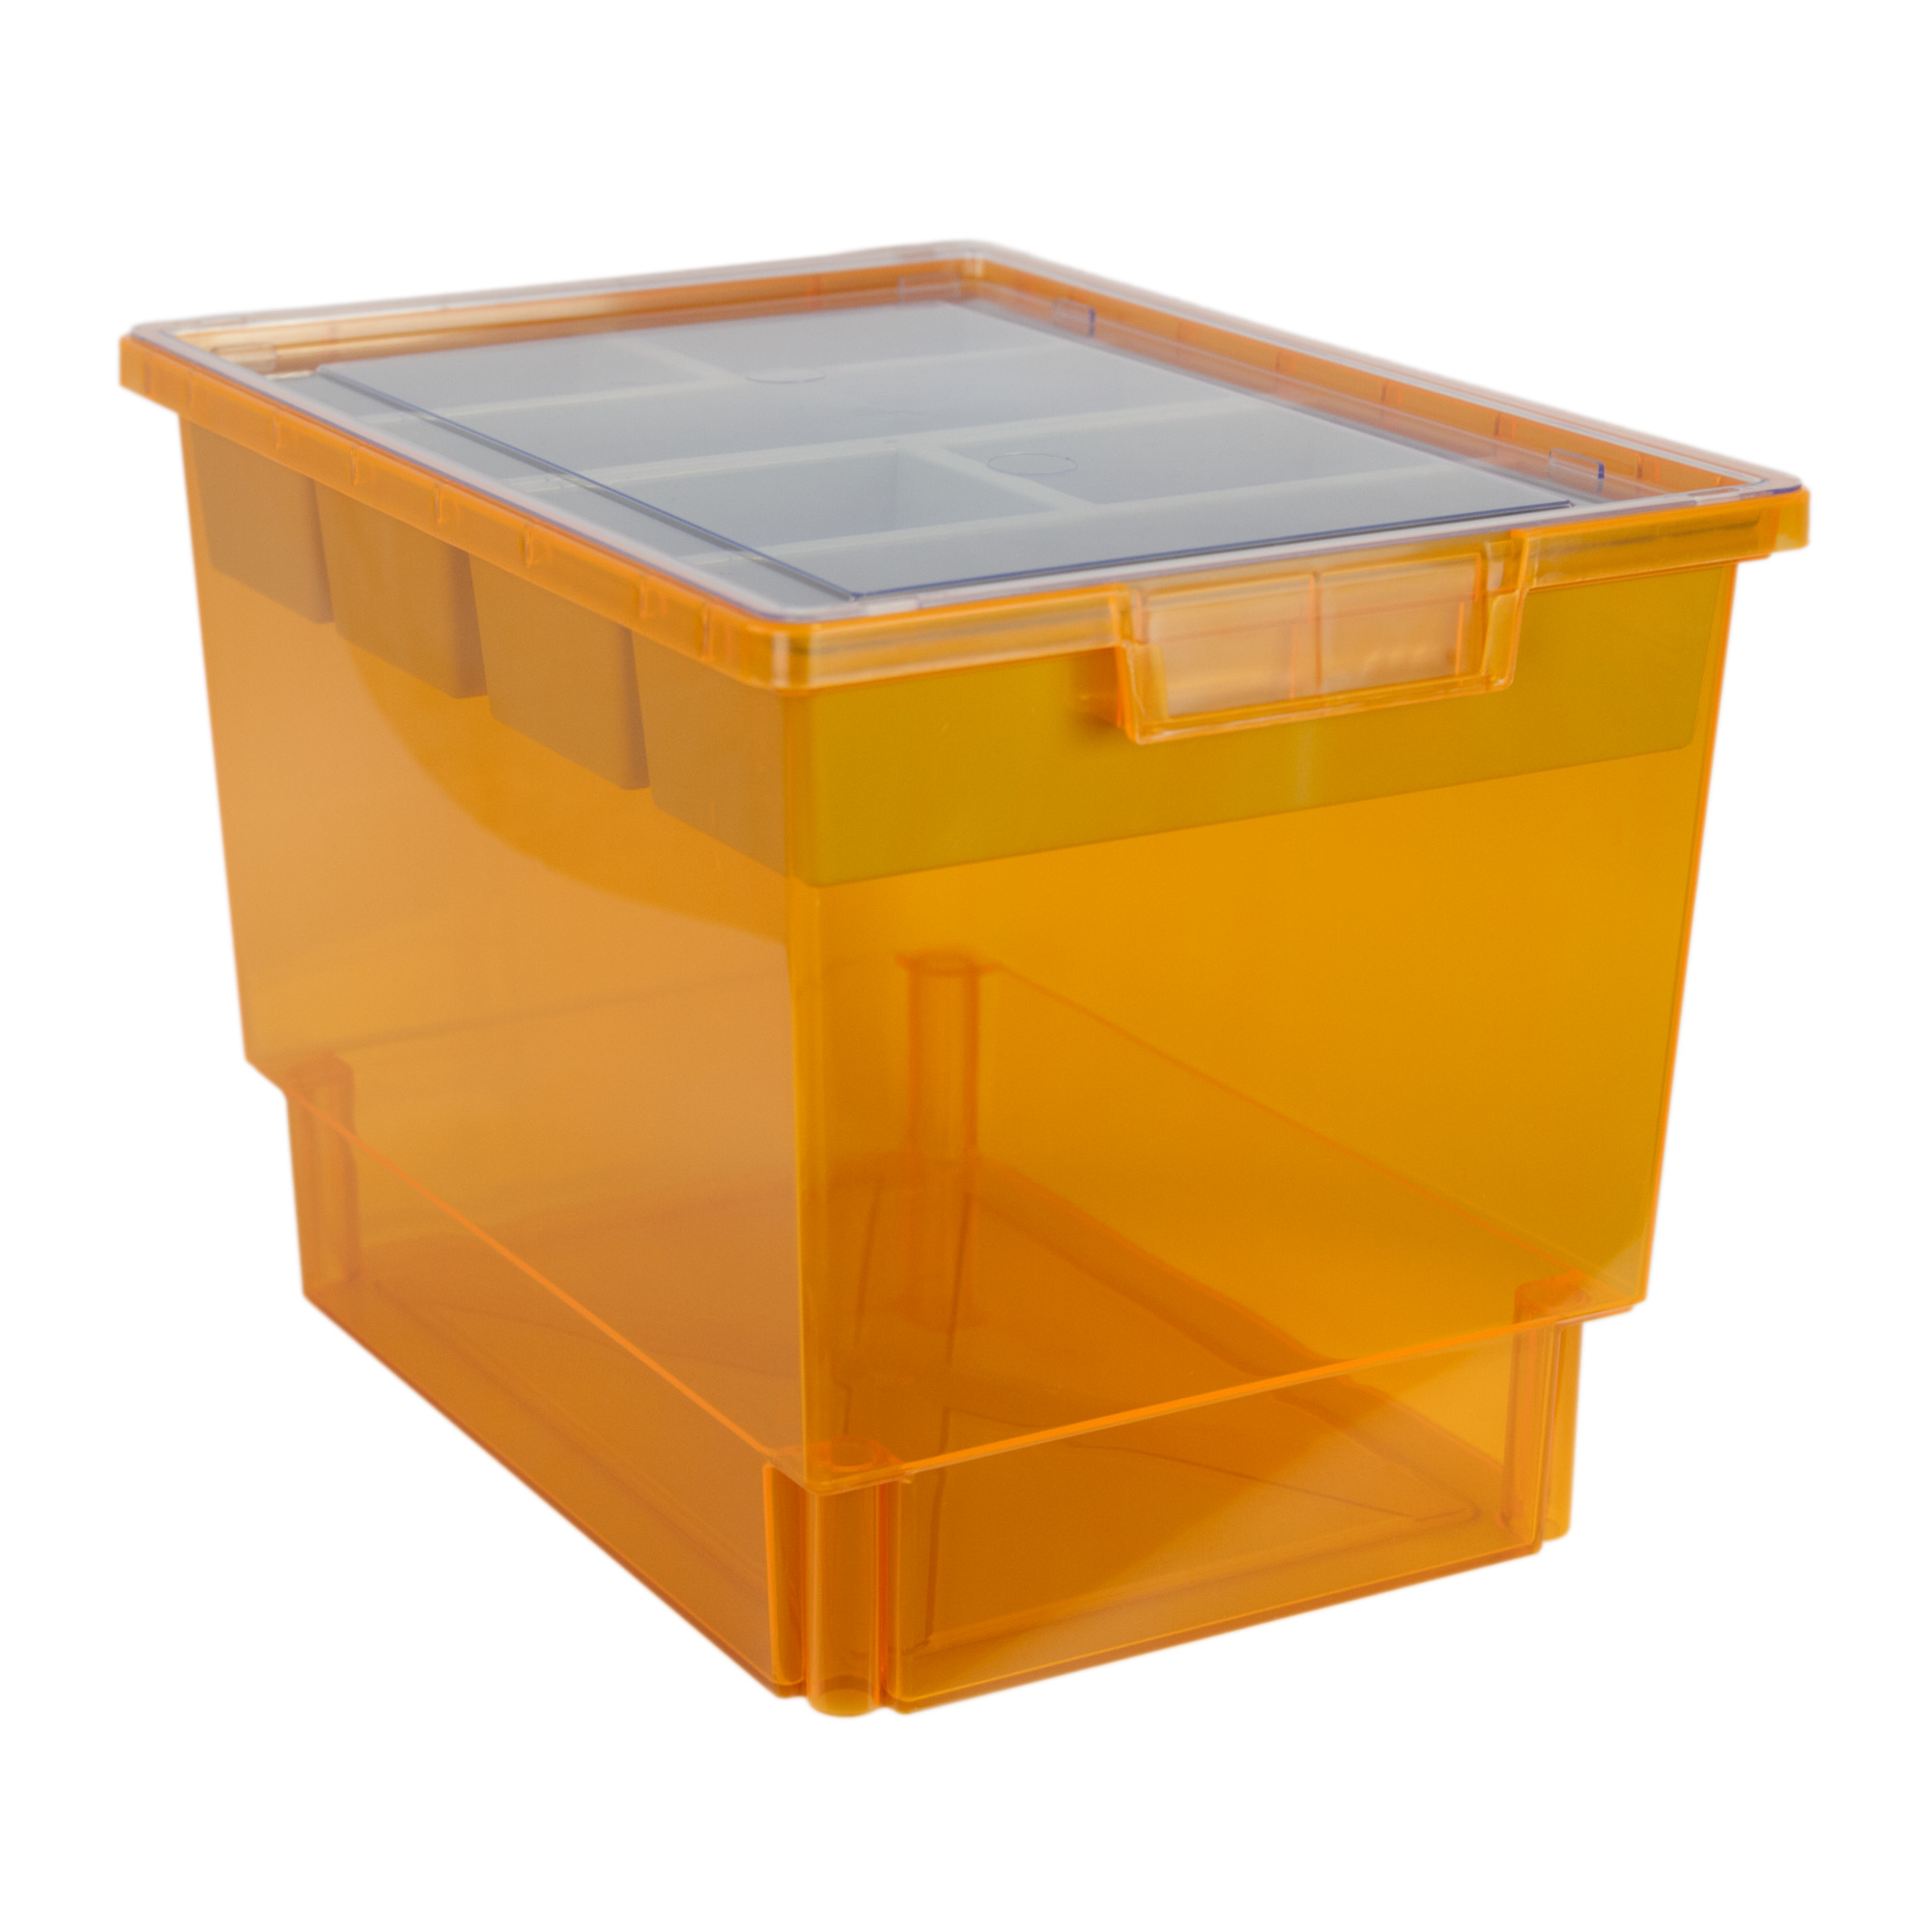 Certwood StorWerks, Slim Line 12Inch Tray Kit (3 x Divisions) Orange, Included (qty.) 1, Material Plastic, Height 9 in, Model CE1954FO-NK0202-1